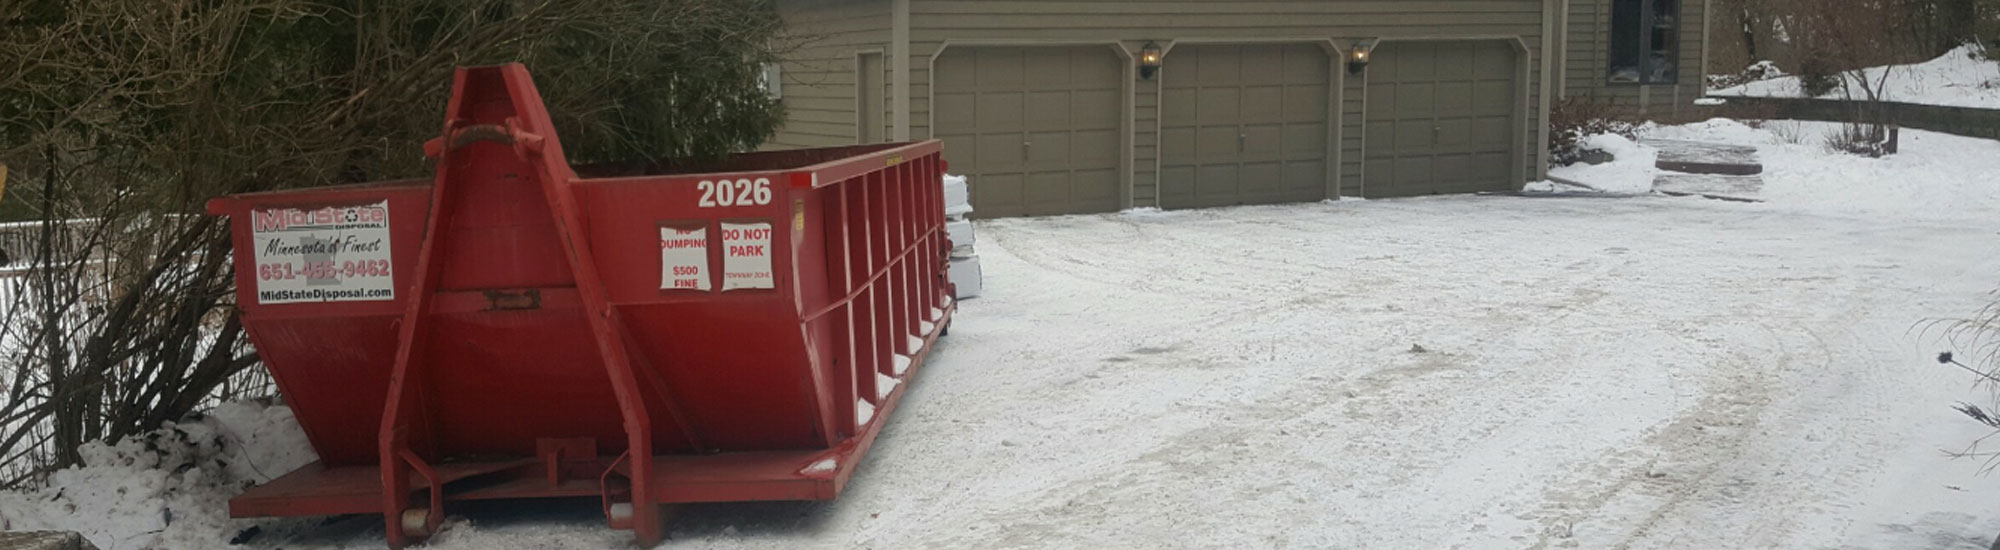 What Is The Best Budget Dumpster Rental Company?